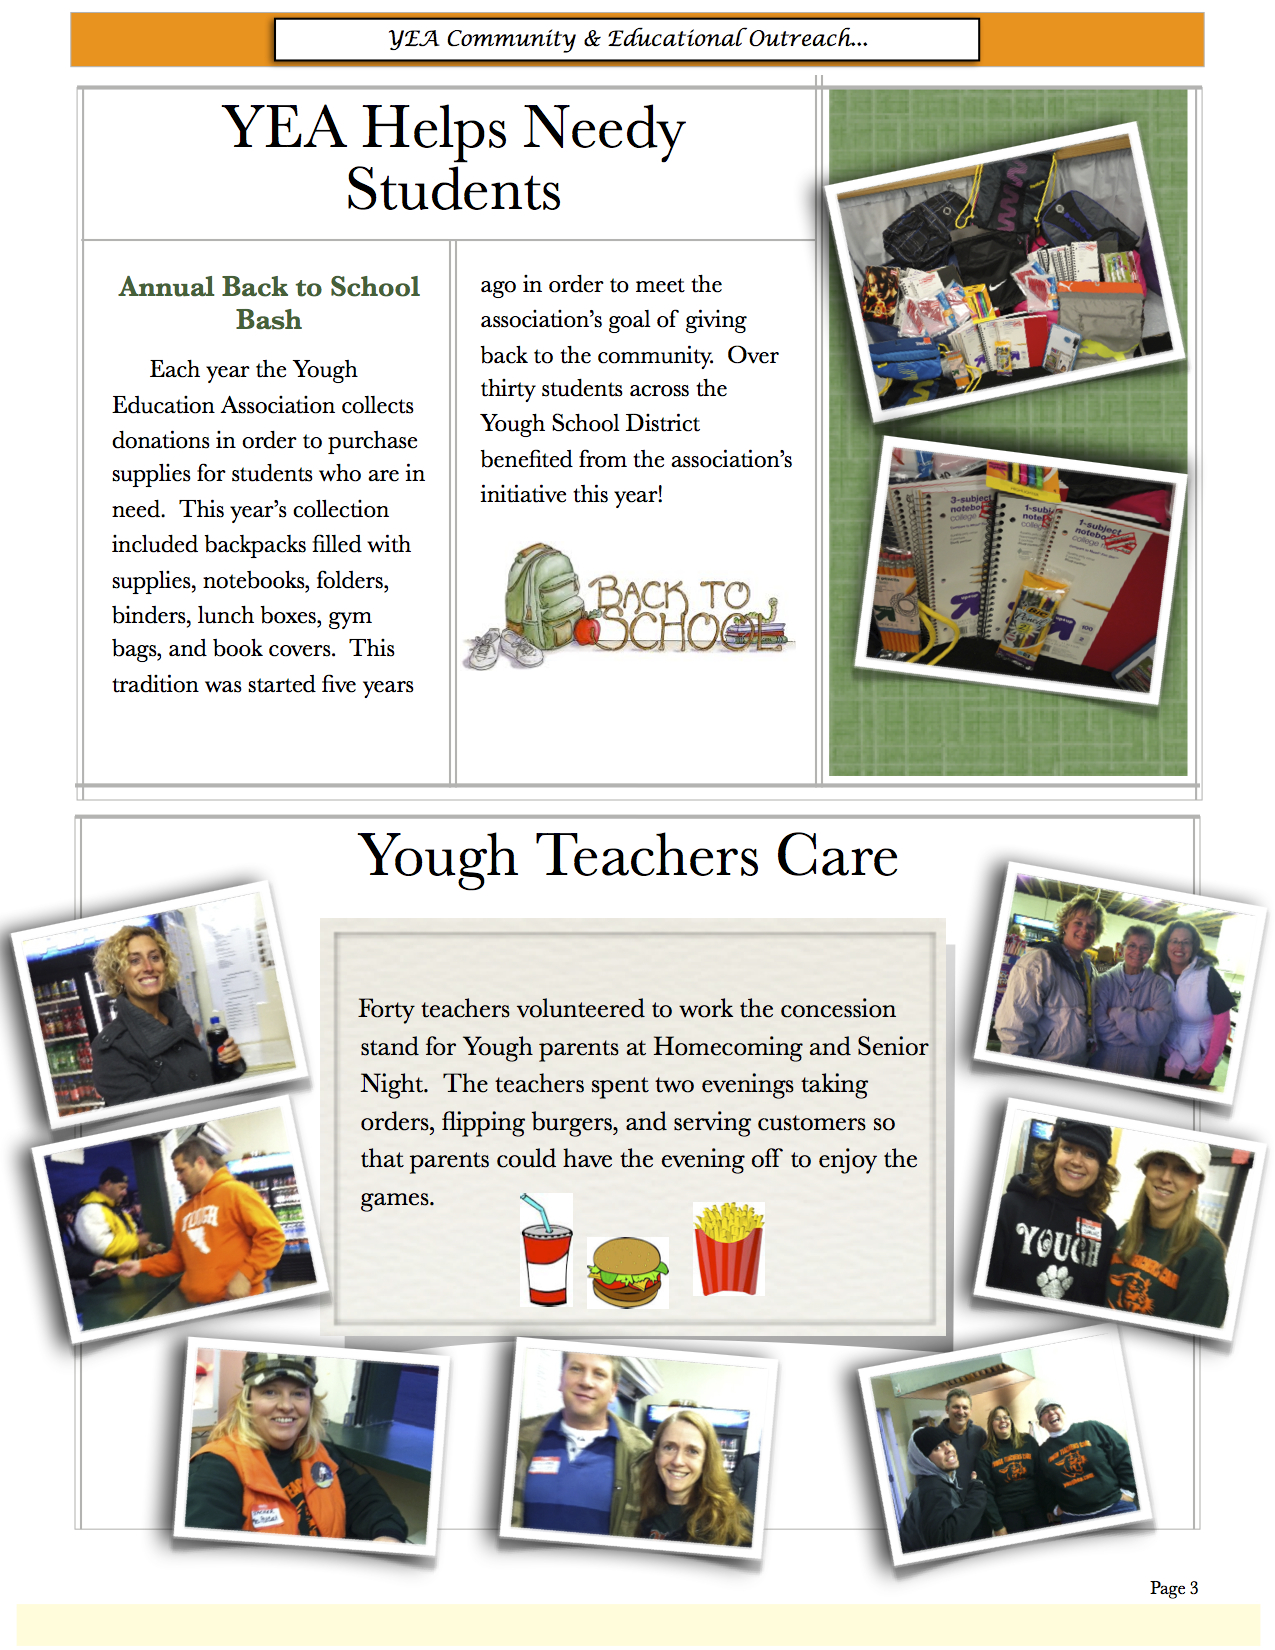 Yough Talk Page 1